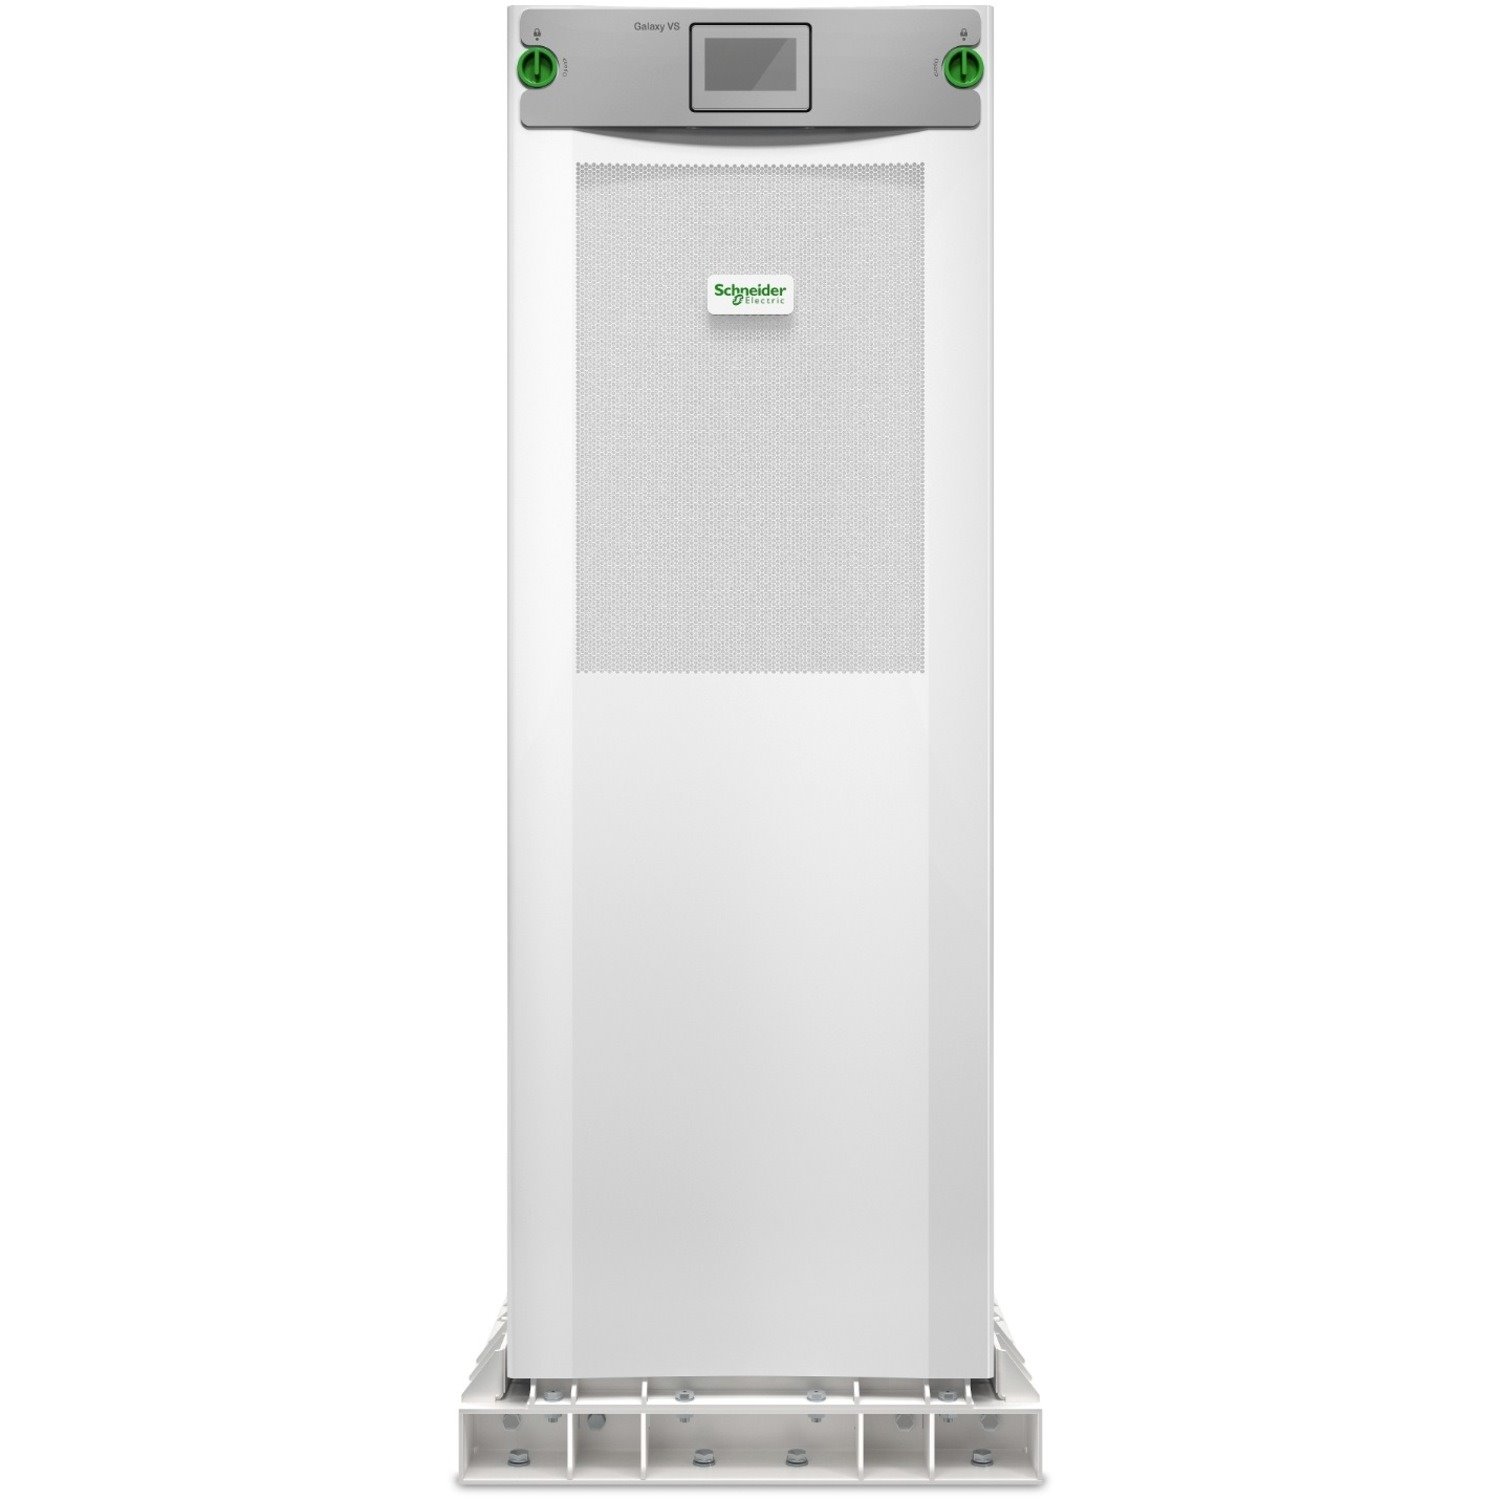 Schneider Electric Galaxy VS Double Conversion Online UPS - 60 kVA/60 kW - Three Phase